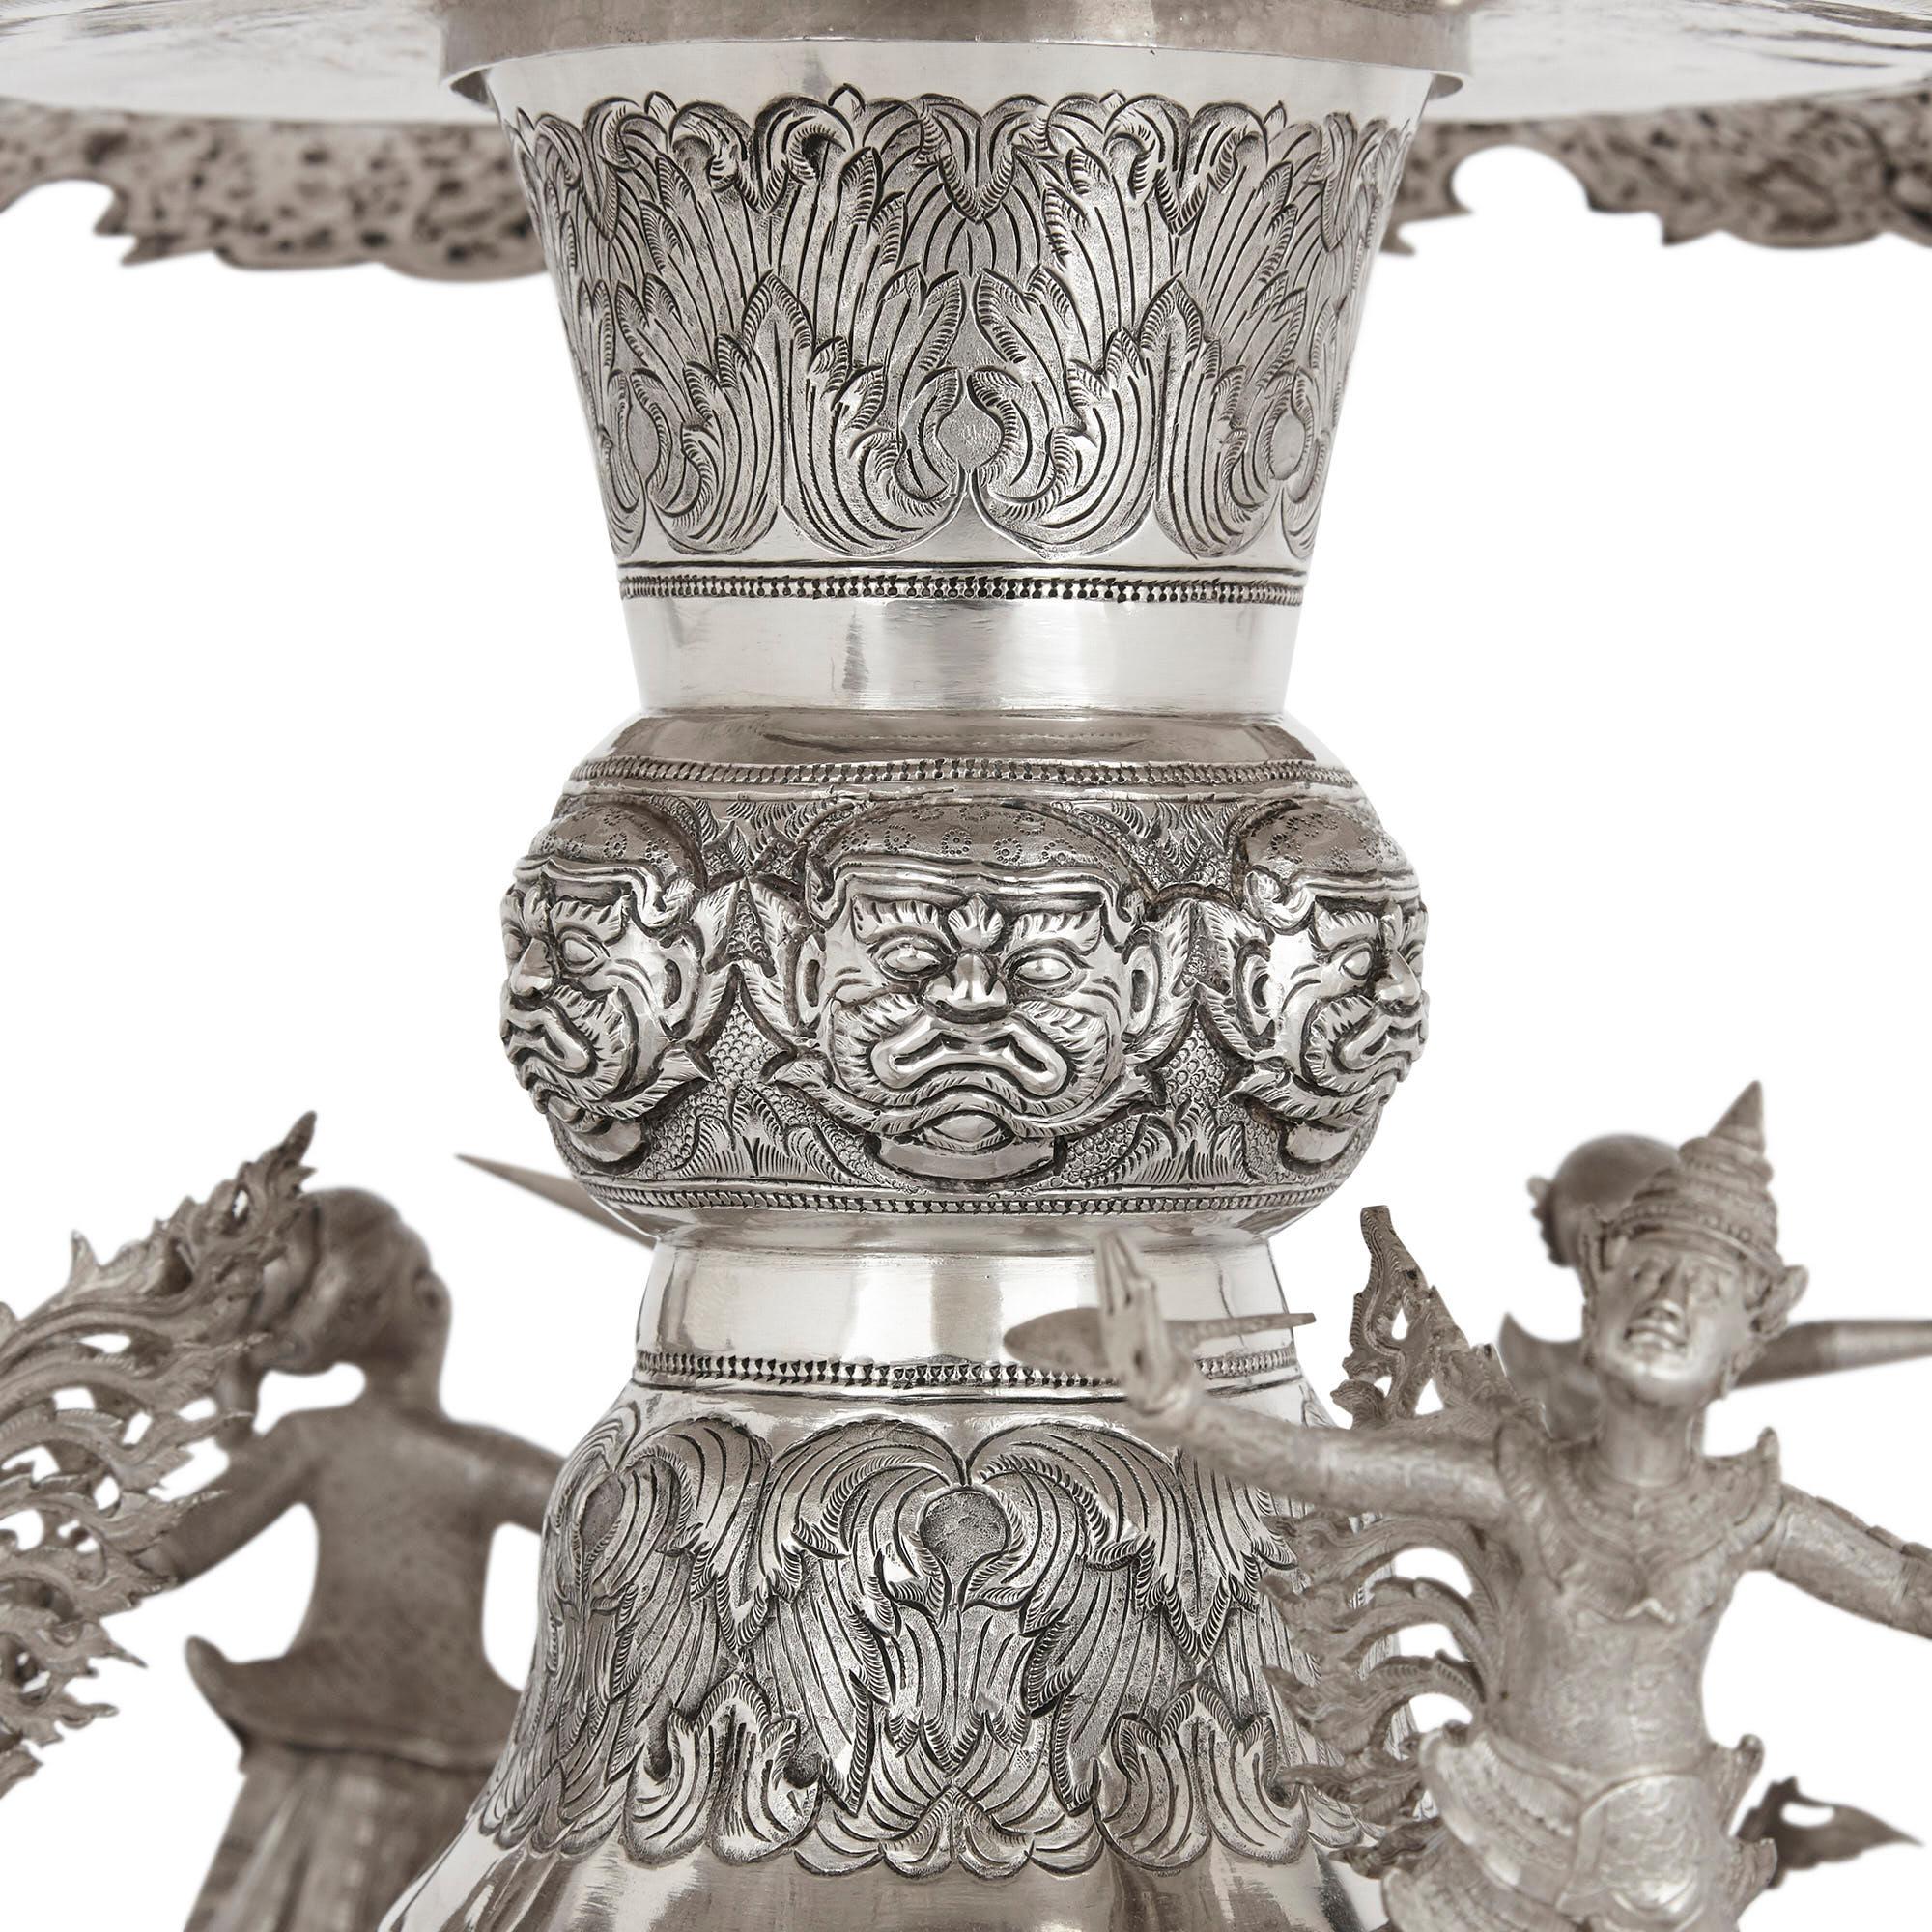 Burmese Large and Impressive Silver Centrepiece Vase from Burma